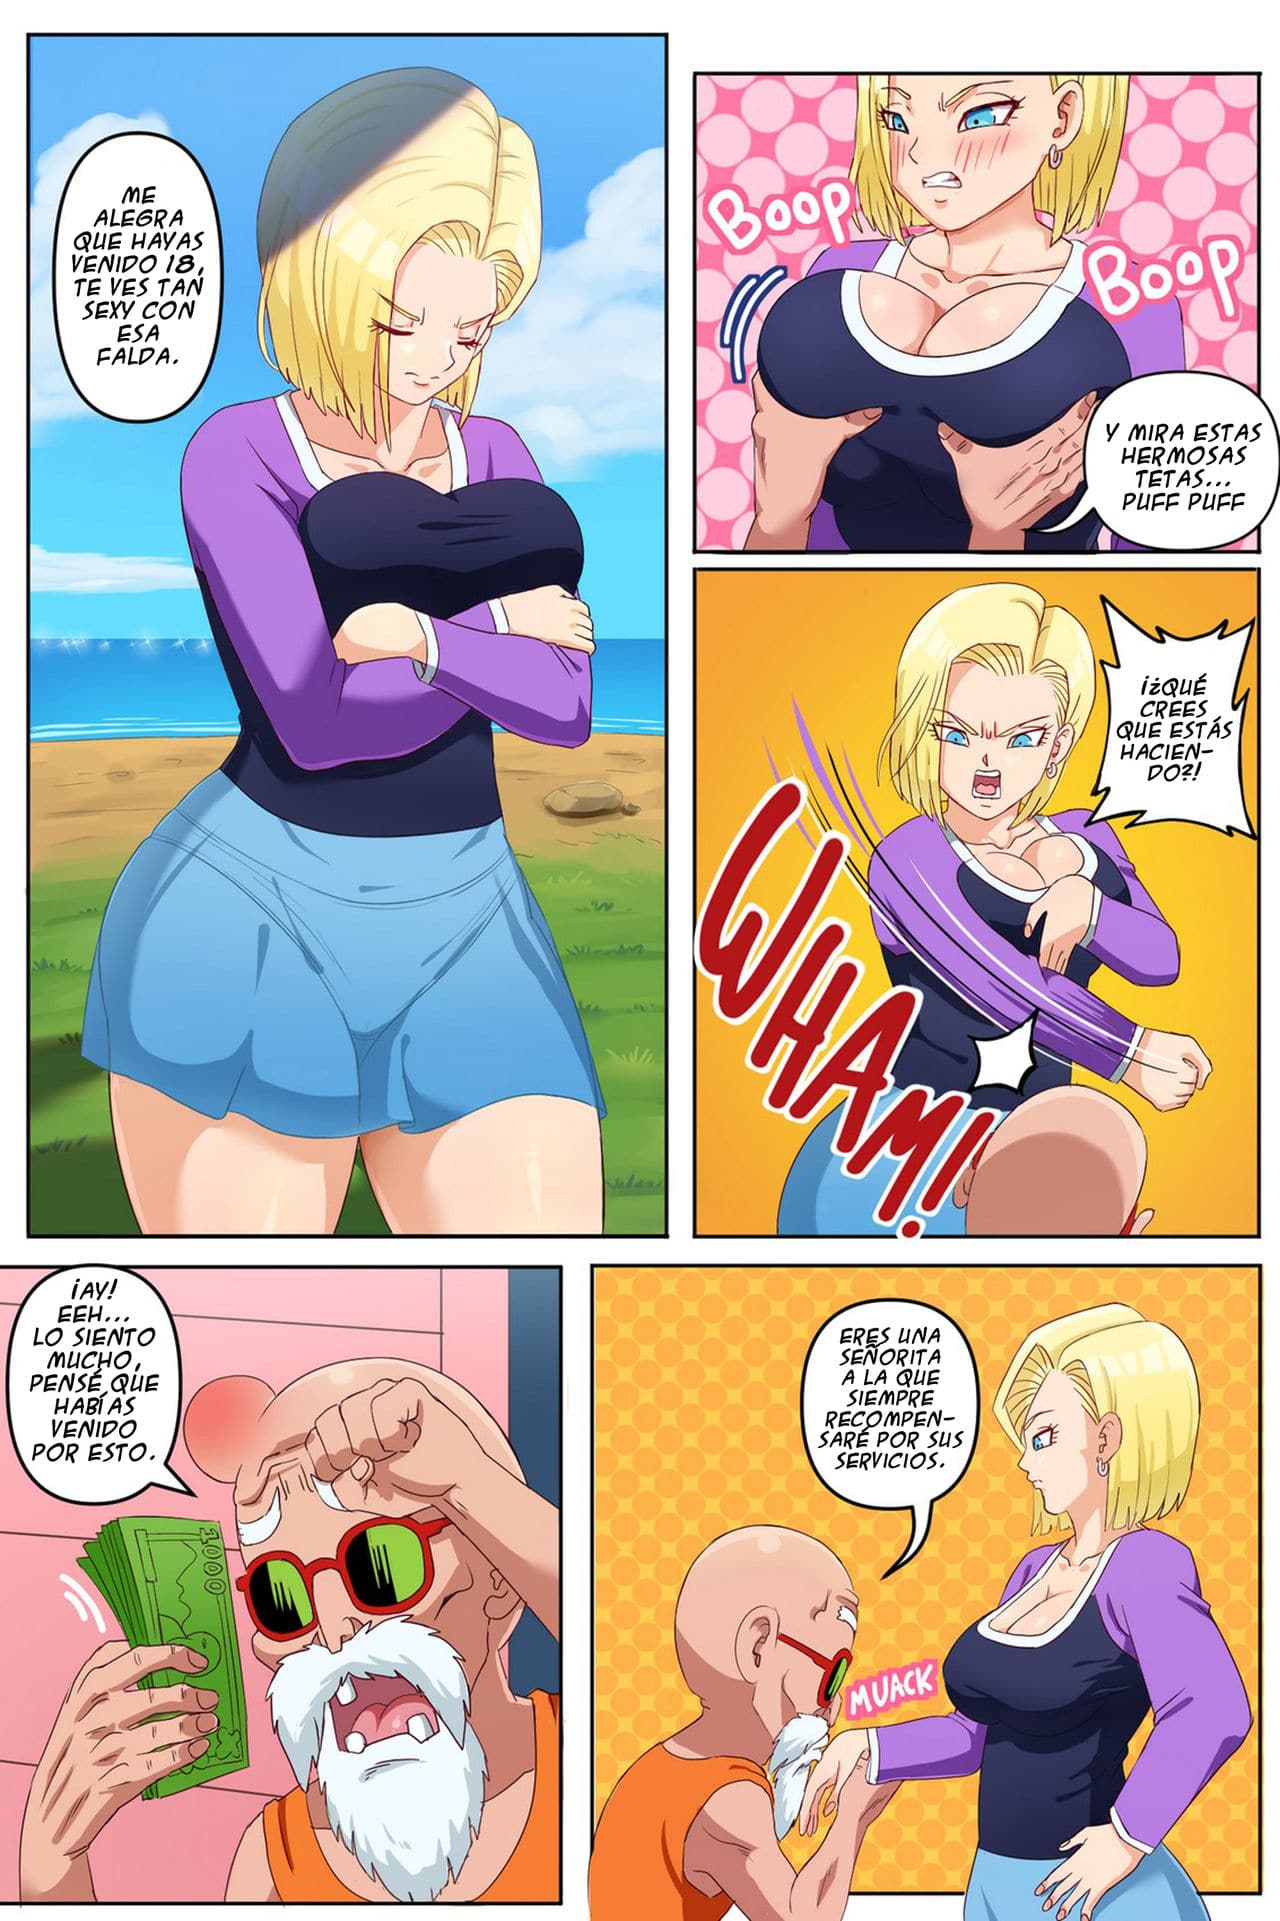 Android 18 NTR – Capitulo 1 - 2